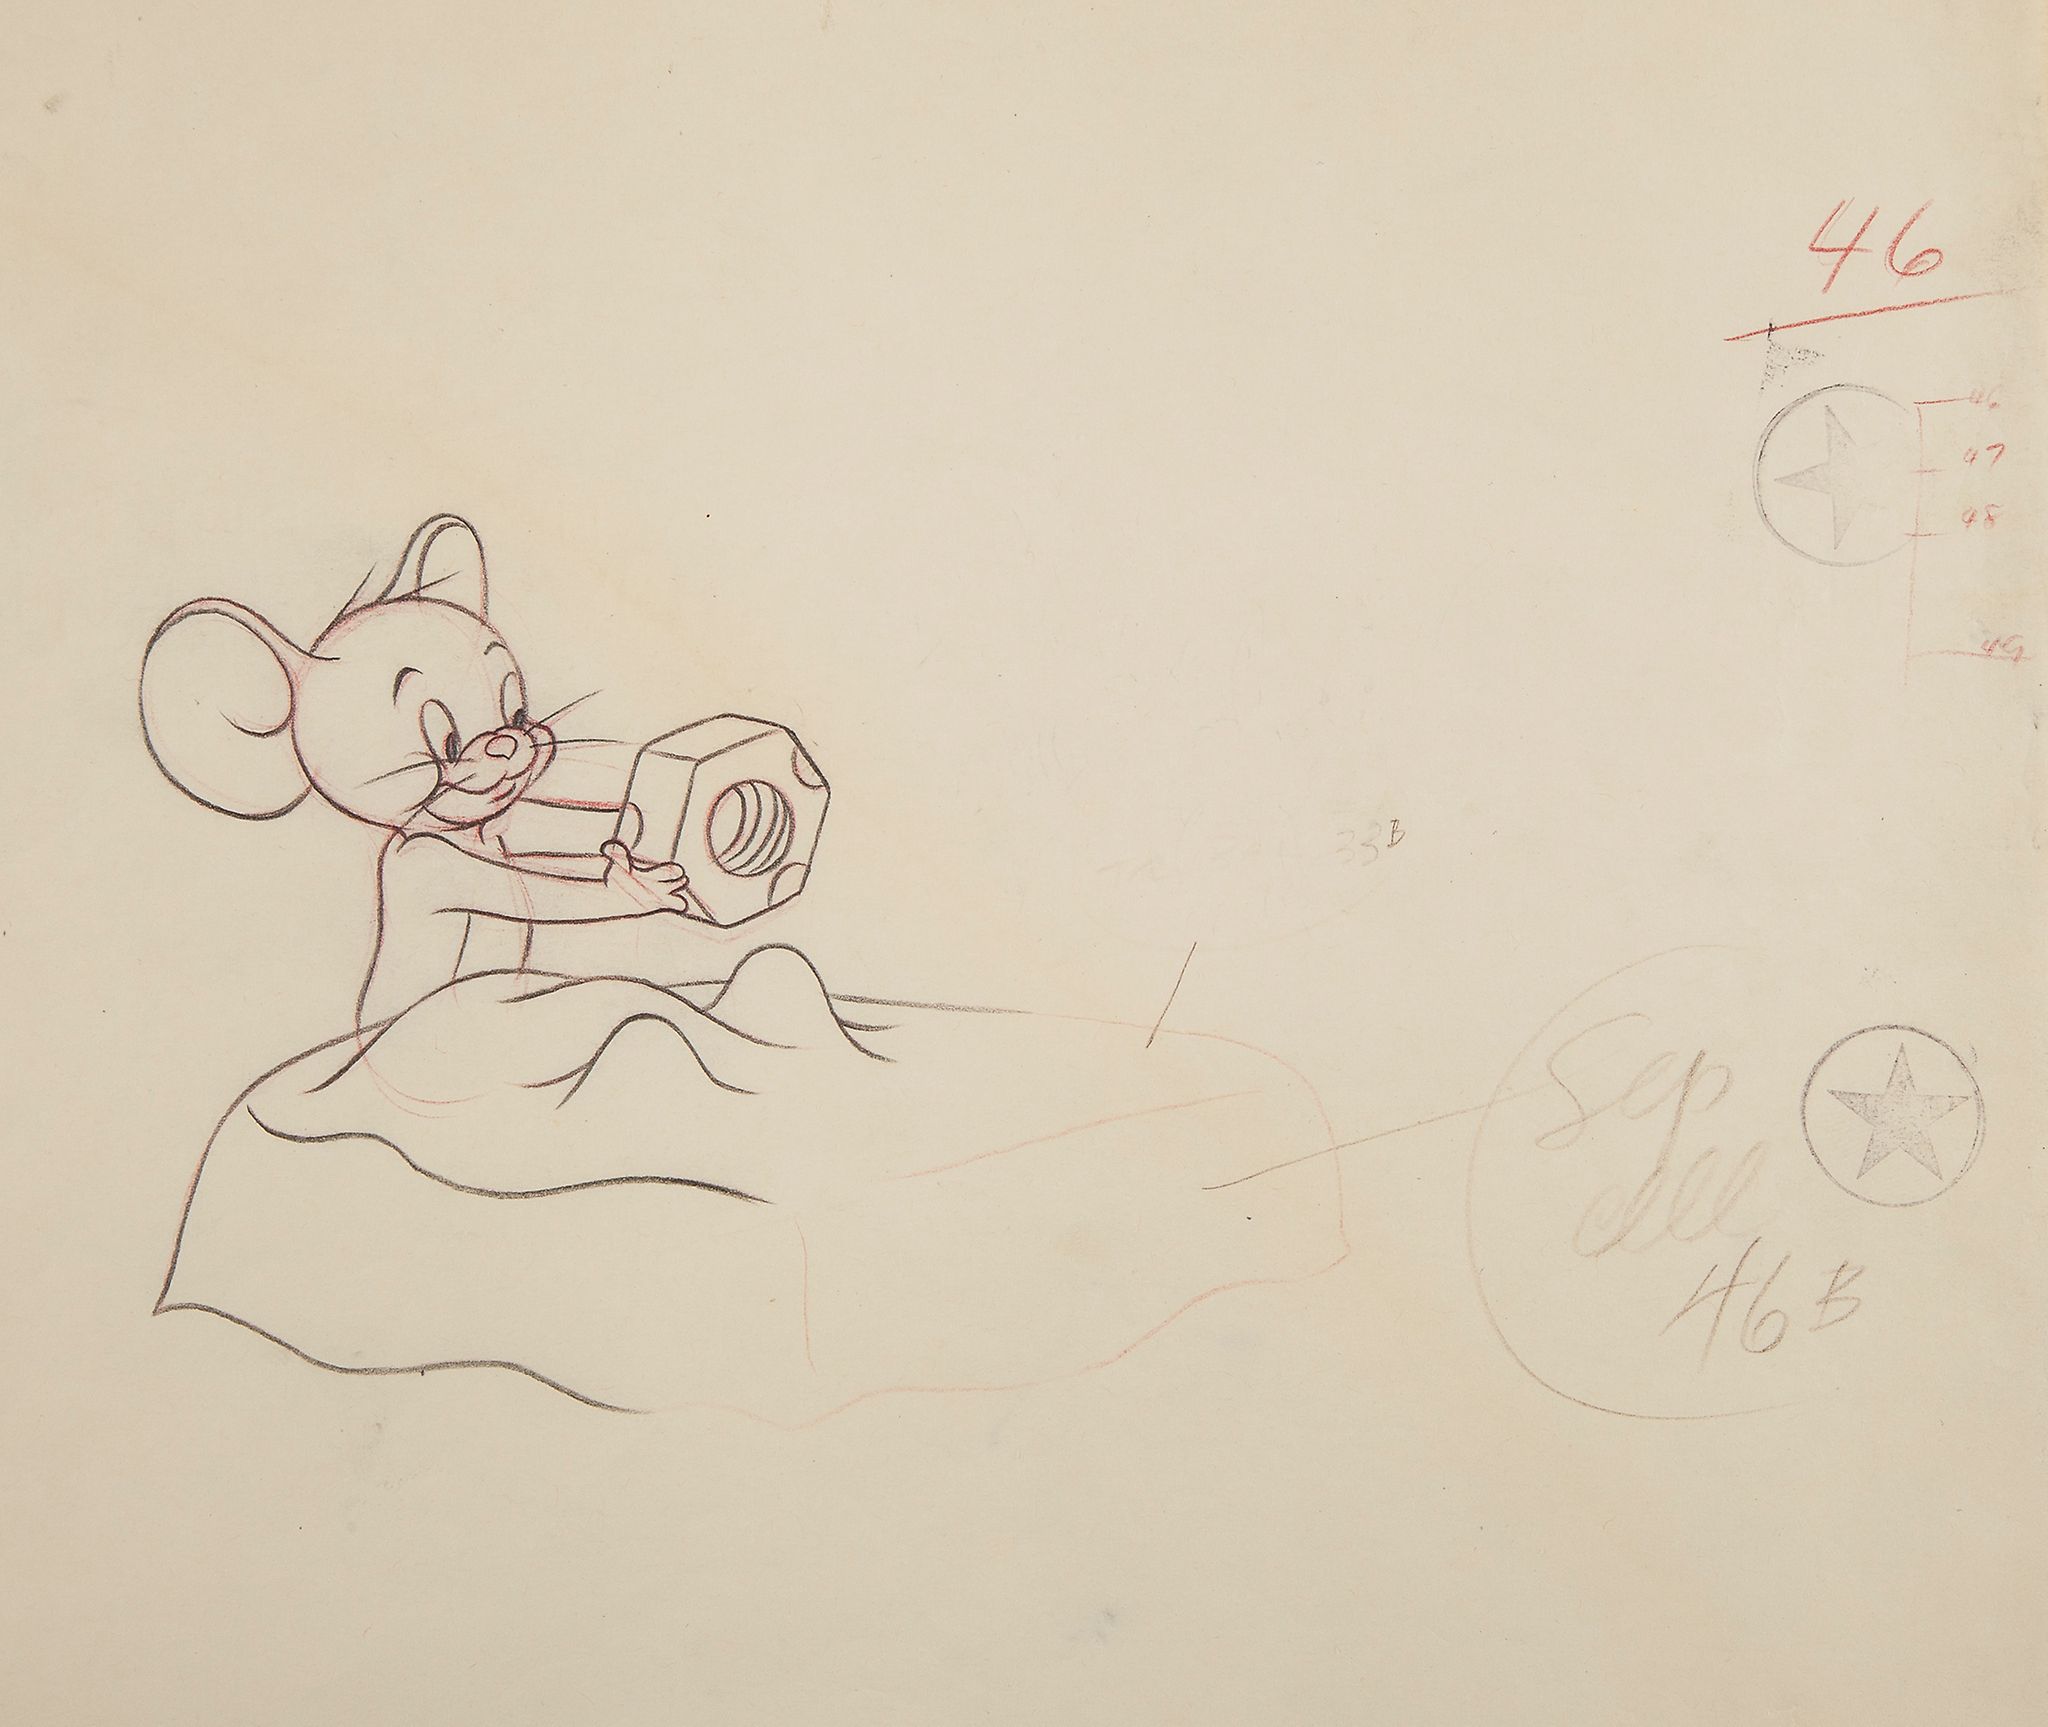 Caricatures and cartoons.- - Wile E. Coyote & Road Runner,  together with original pencil sketch/